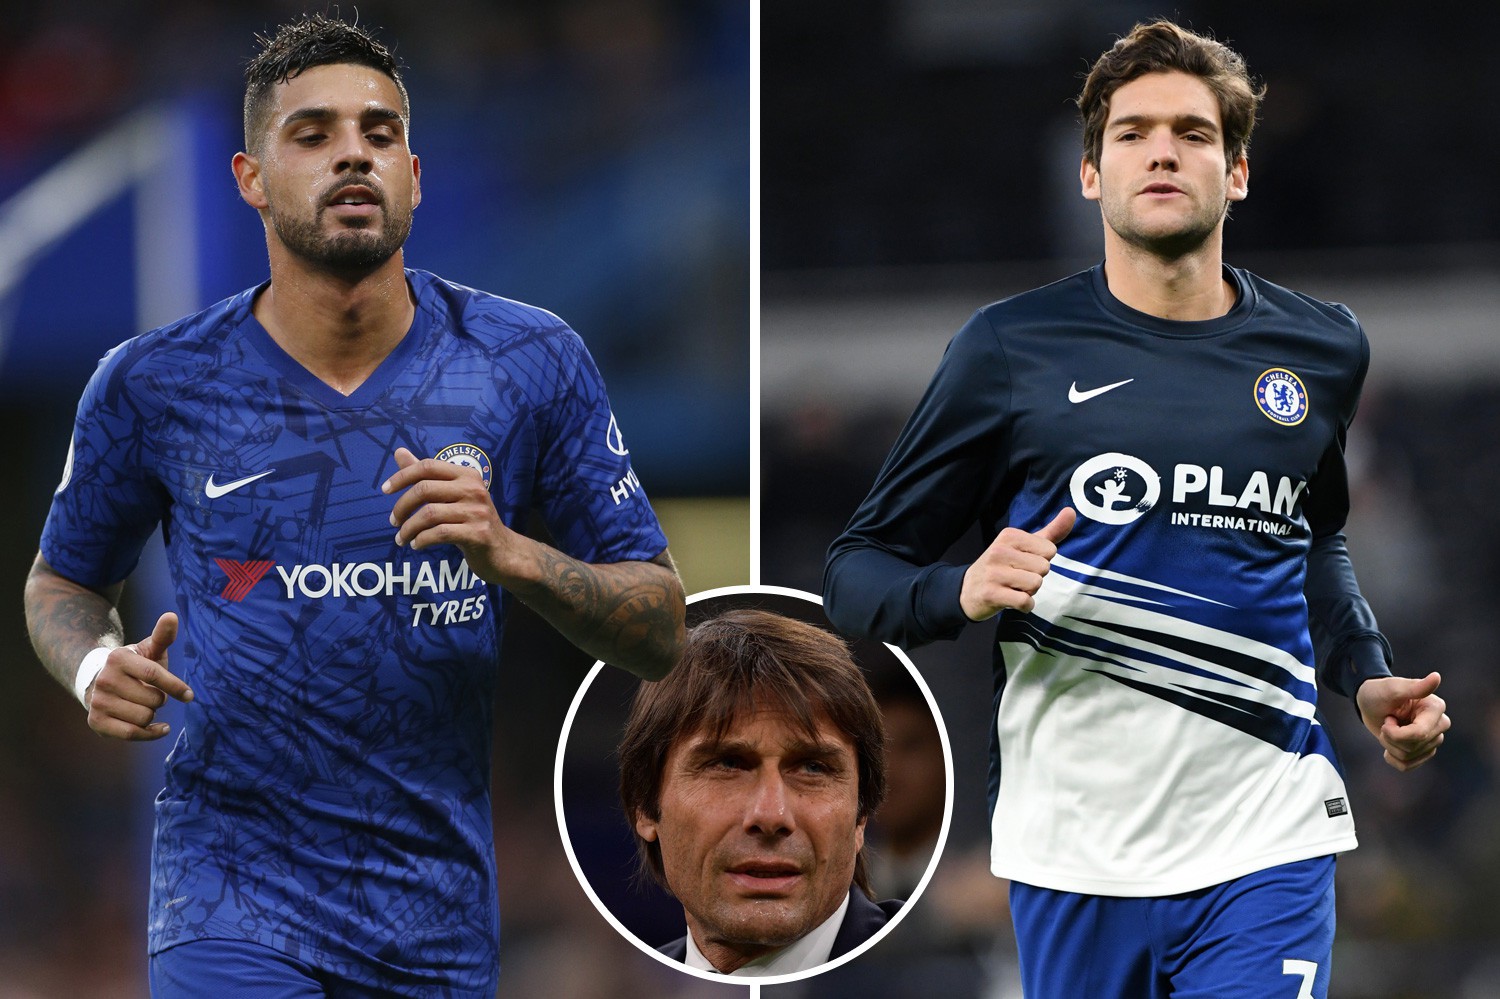 , Chelsea duo Emerson Palmieri and Marcos Alonso wanted by Antonio Contes Inter Milan in transfer window